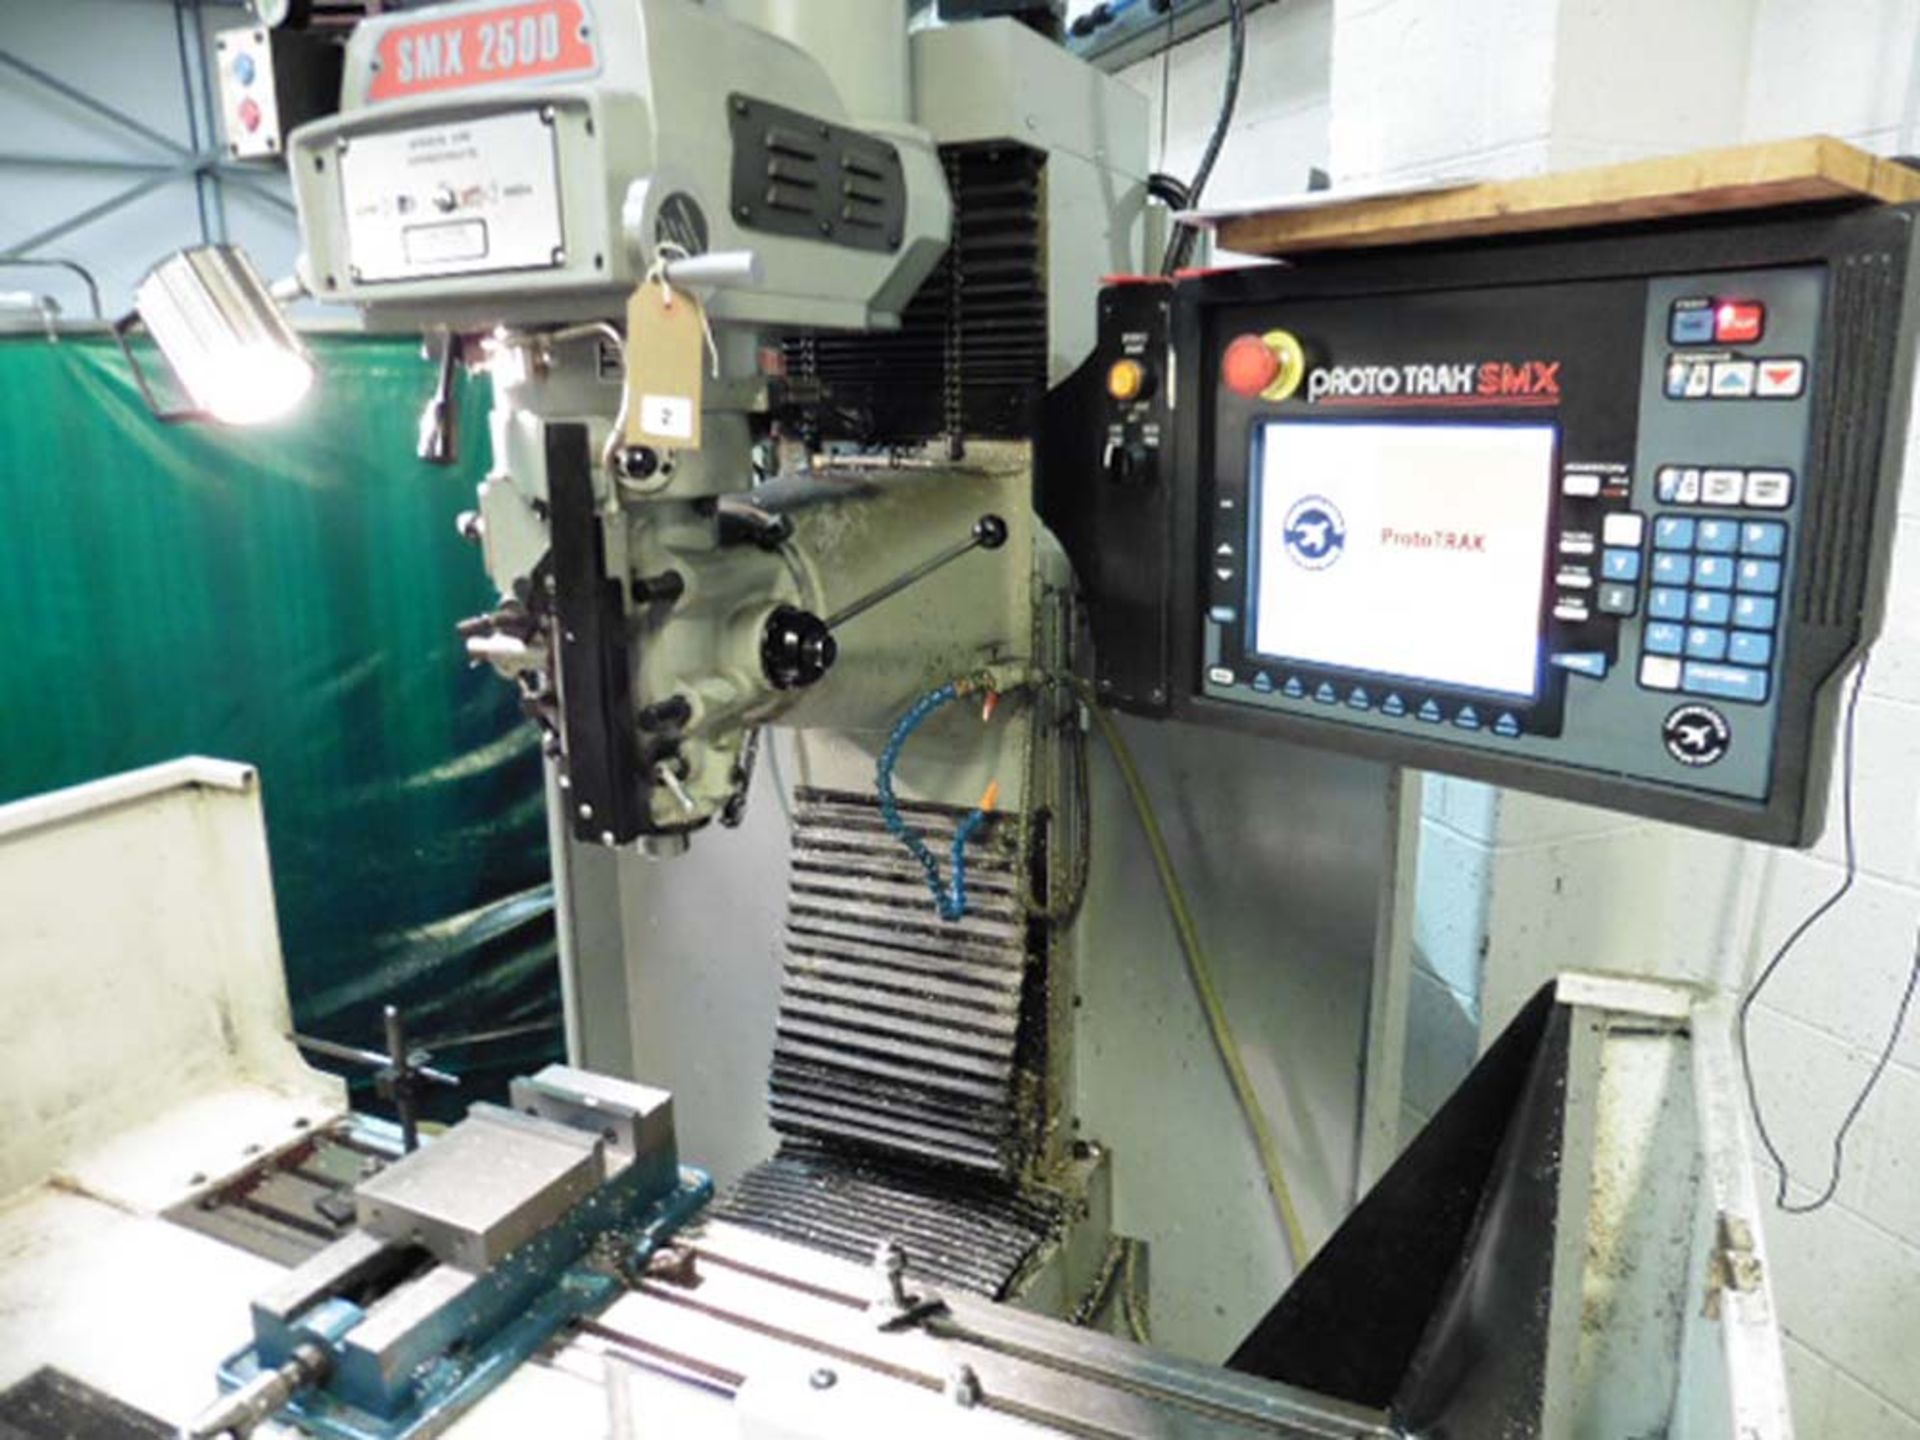 XYZ Machine Tools SMX 2500 CNC milling machine with Prototrax SMX control, Powered Table size 1.1m x - Image 2 of 4